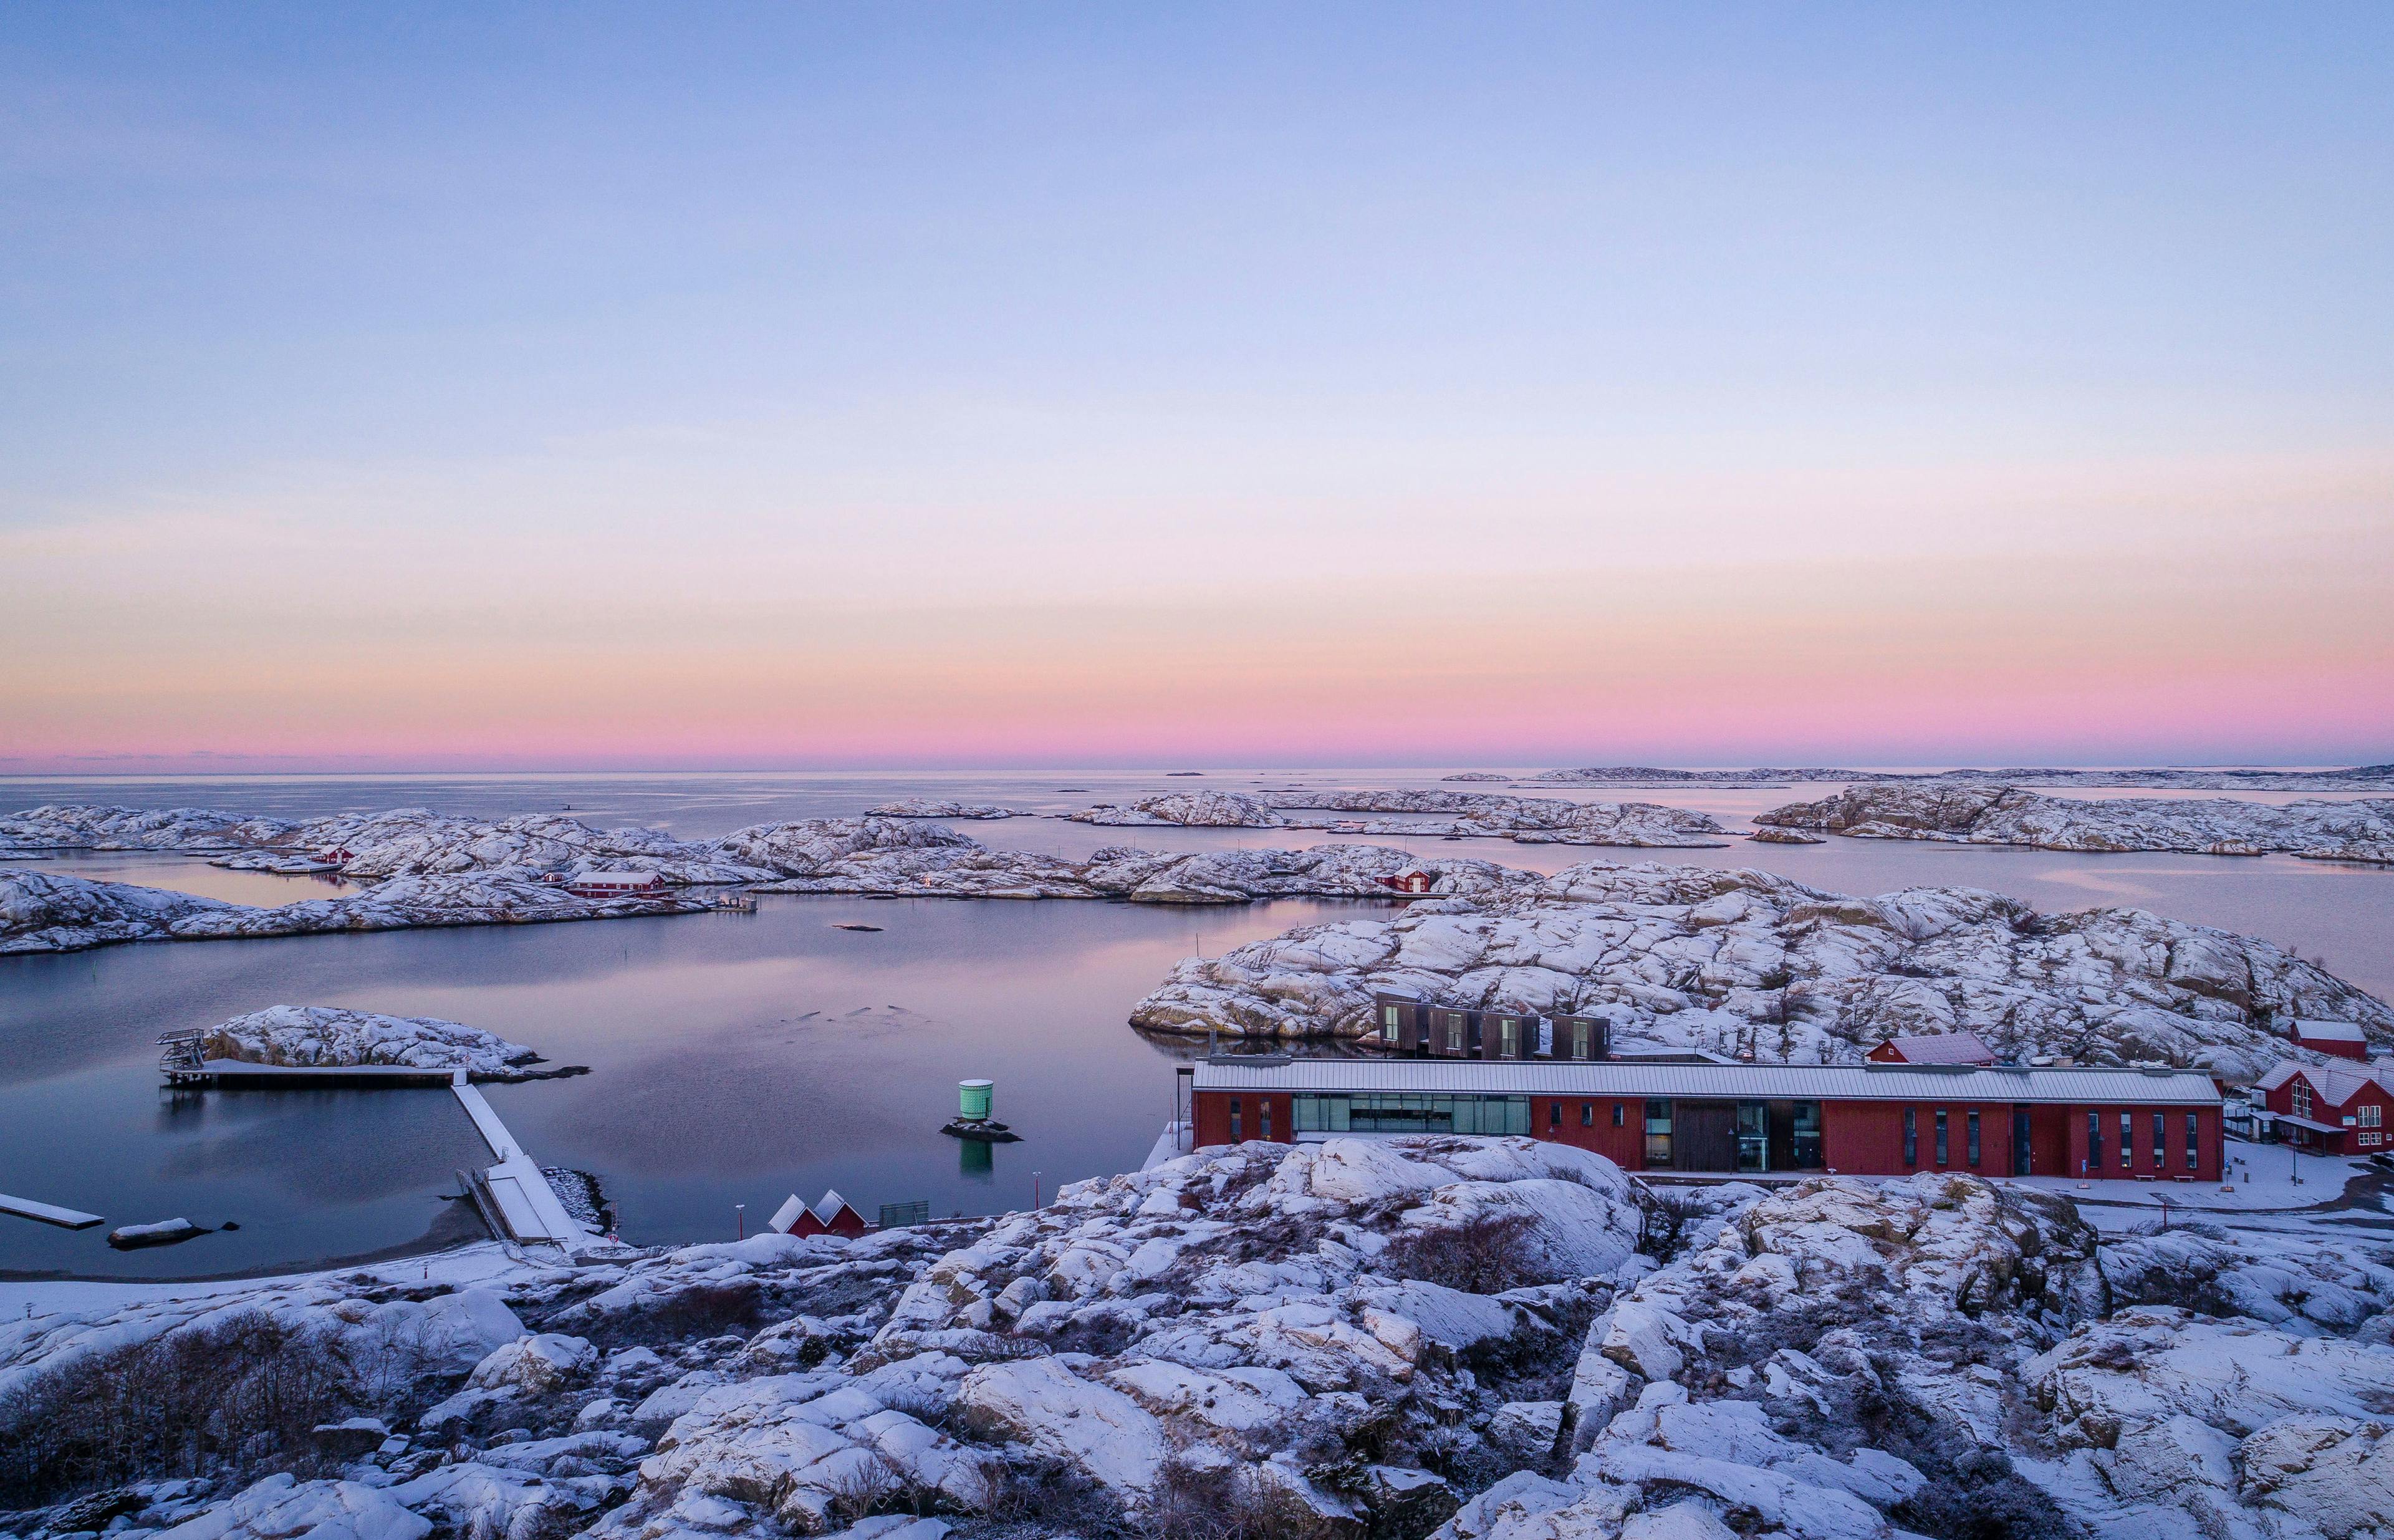 The museum in a snow-covered archipelago, with dim, rose-tinged light from the sky